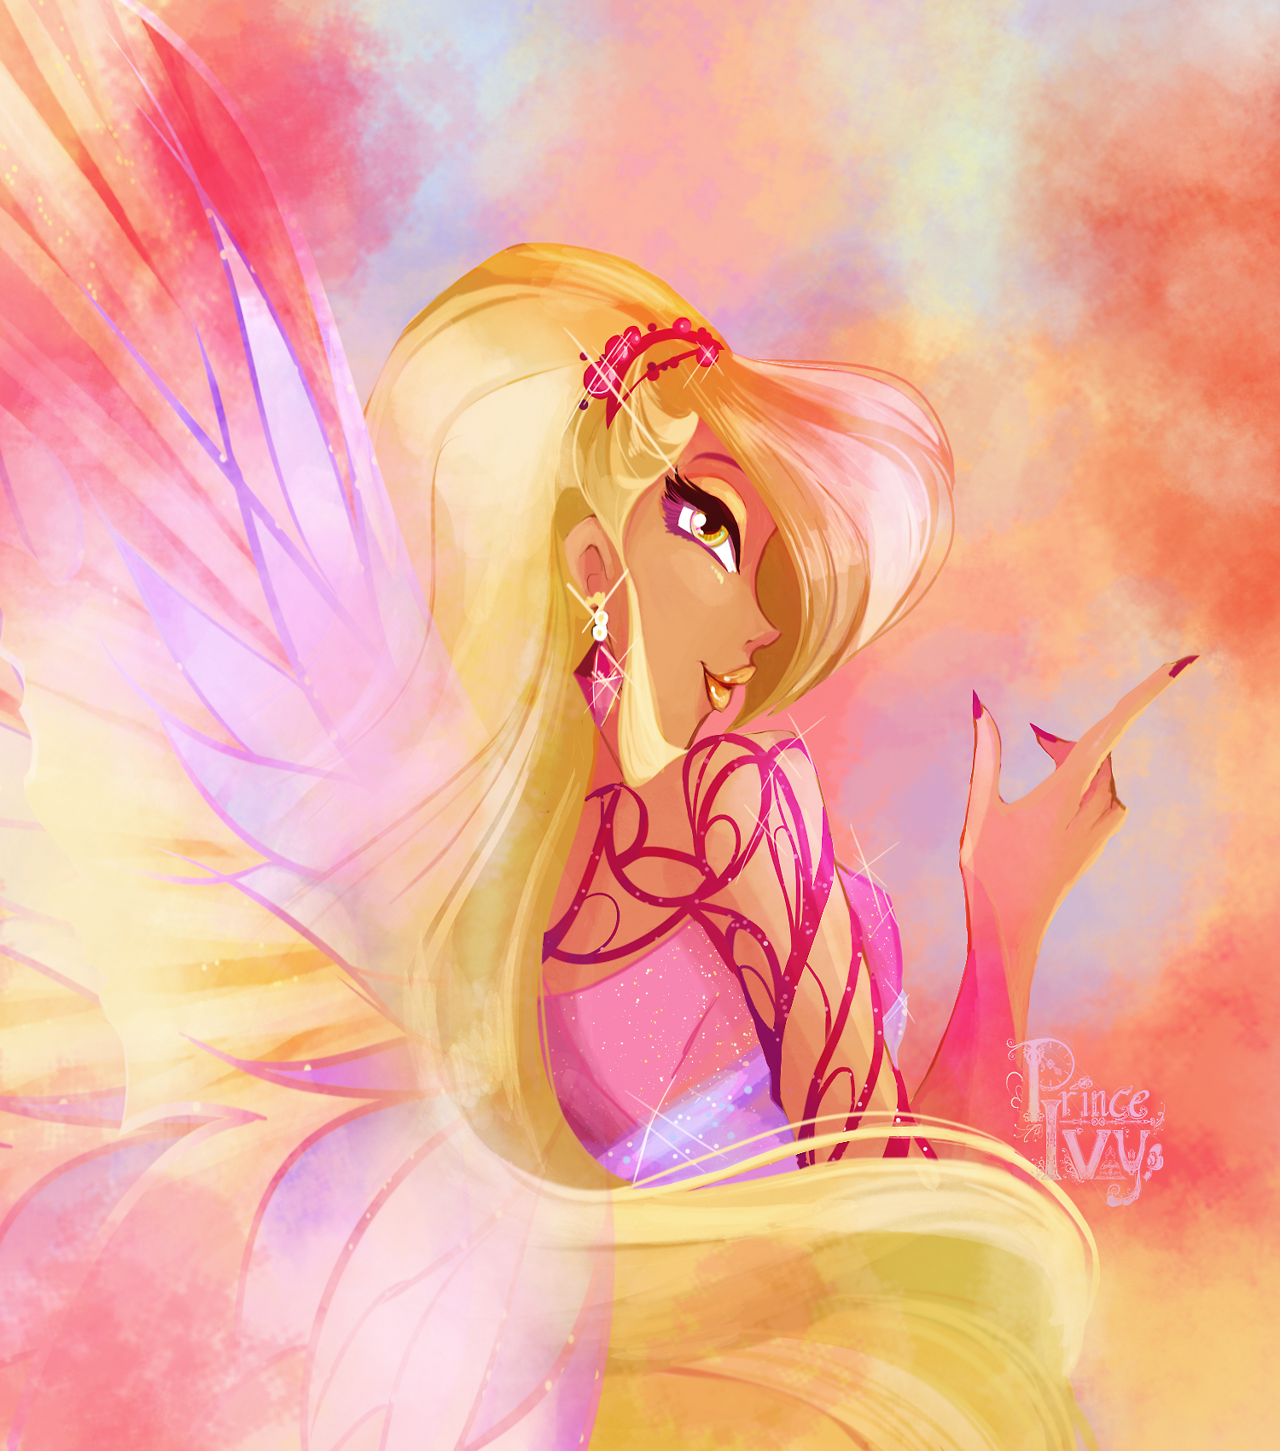 World of Winx Art by princeivy-storybook